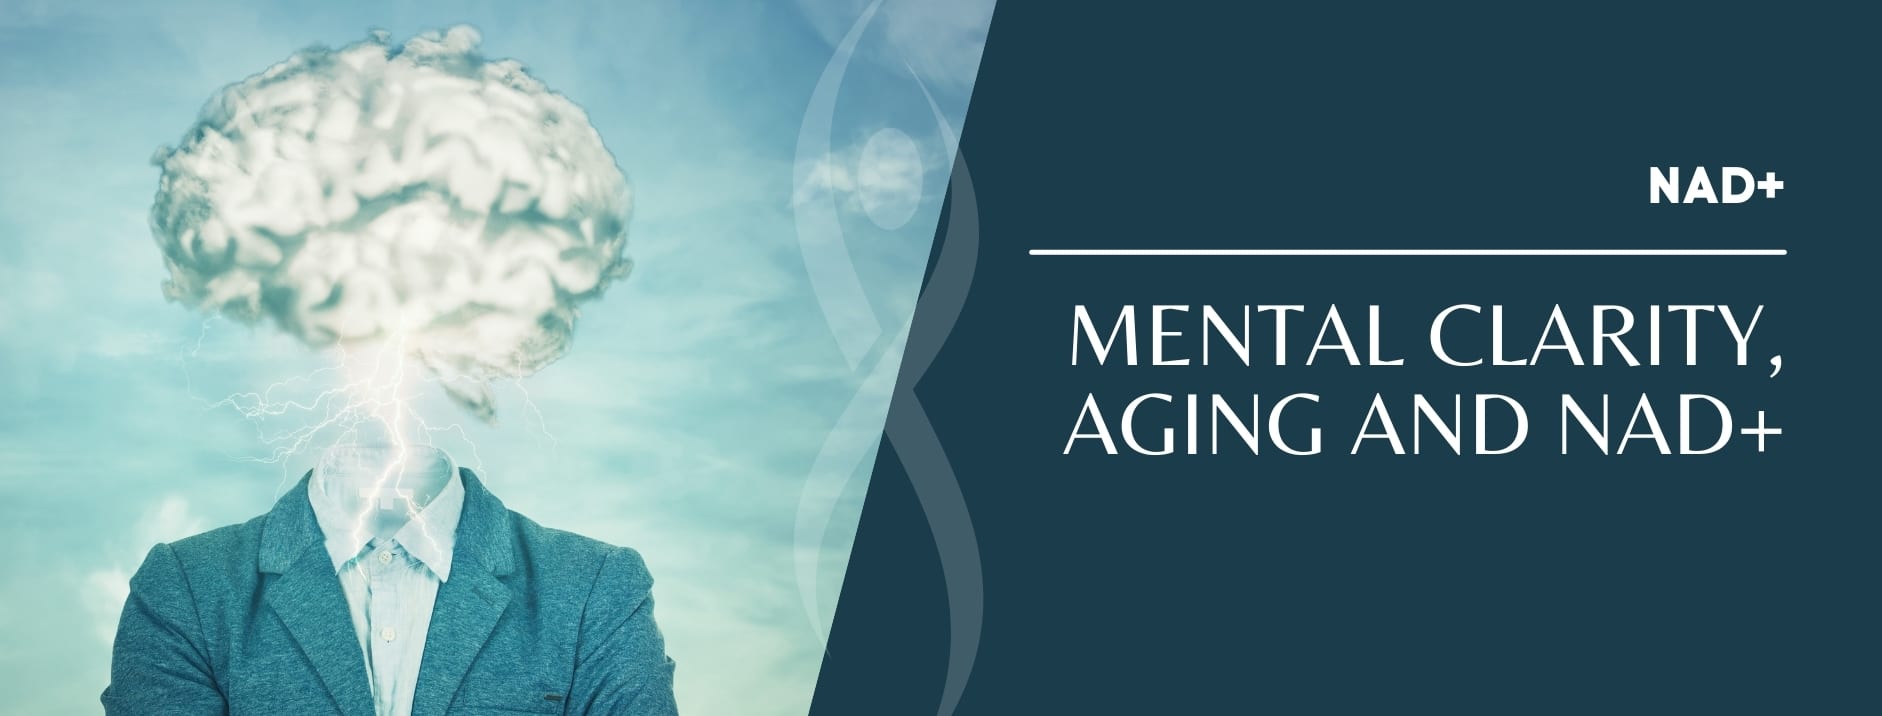 NAD+, Mental Clarity And Anti-Aging